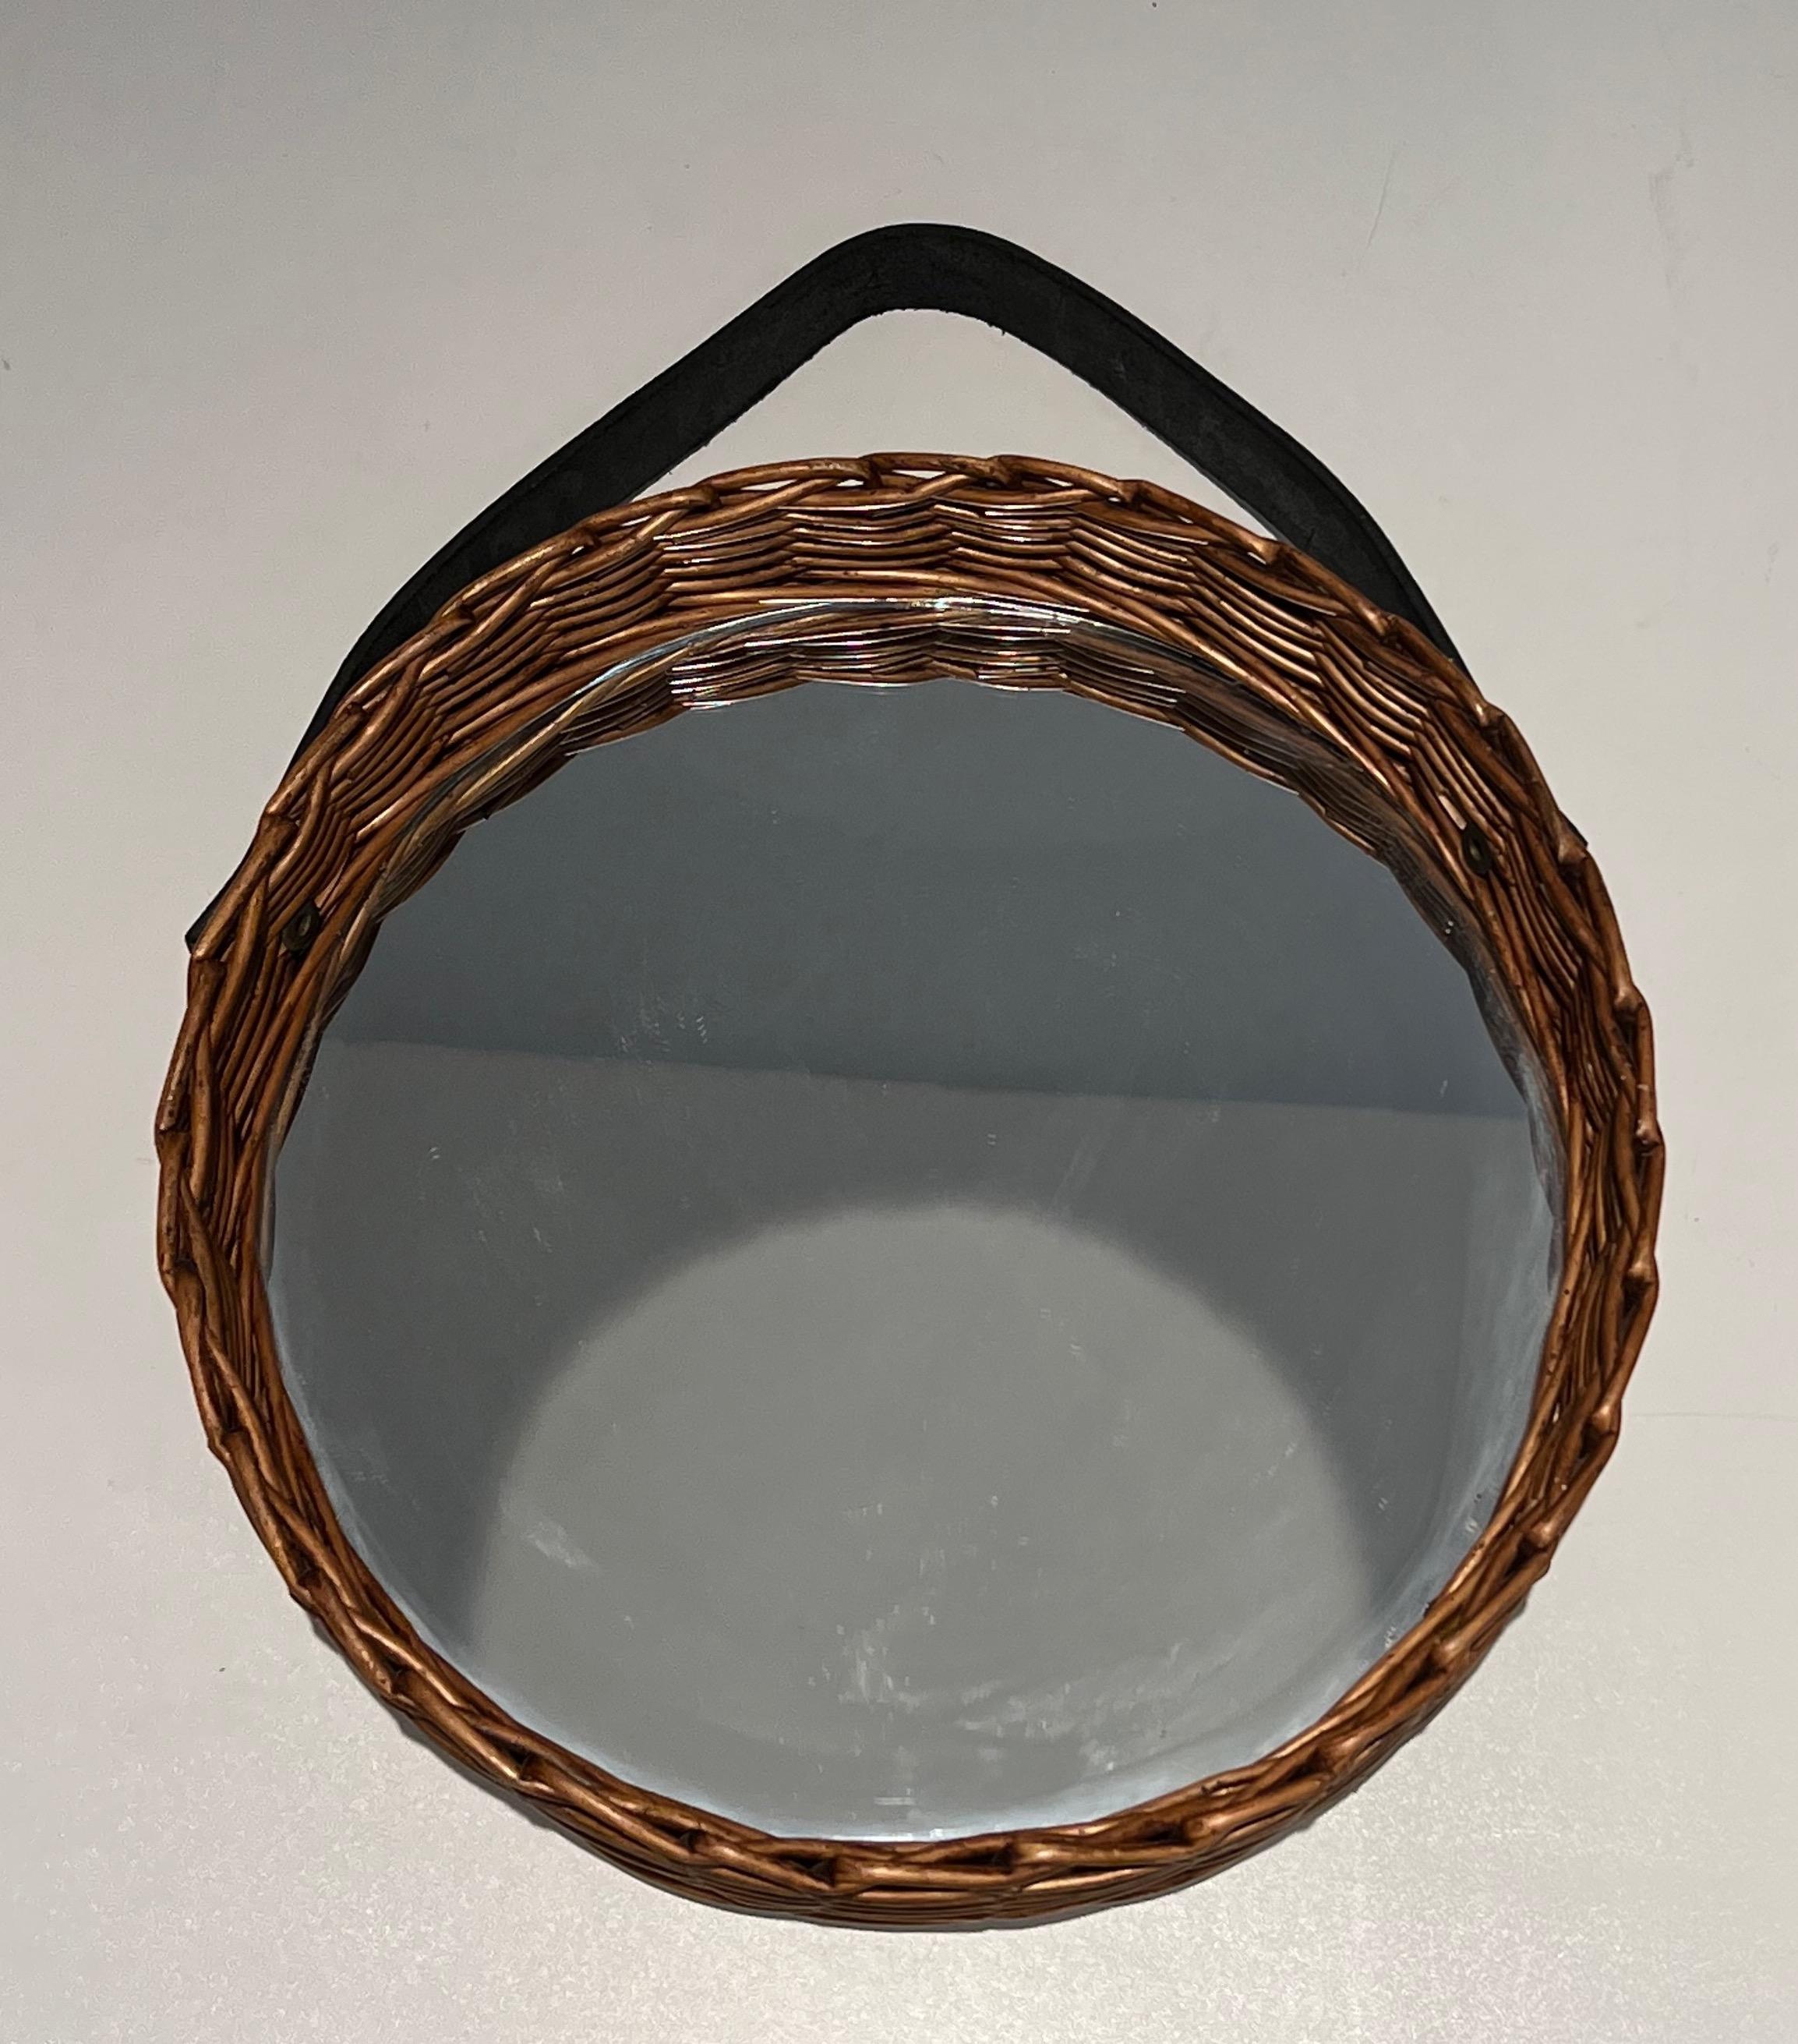 This unusual round mirror is made of a rattan piece surrounded the round mirror with a leather band on top. This is a French work, circa 1950.